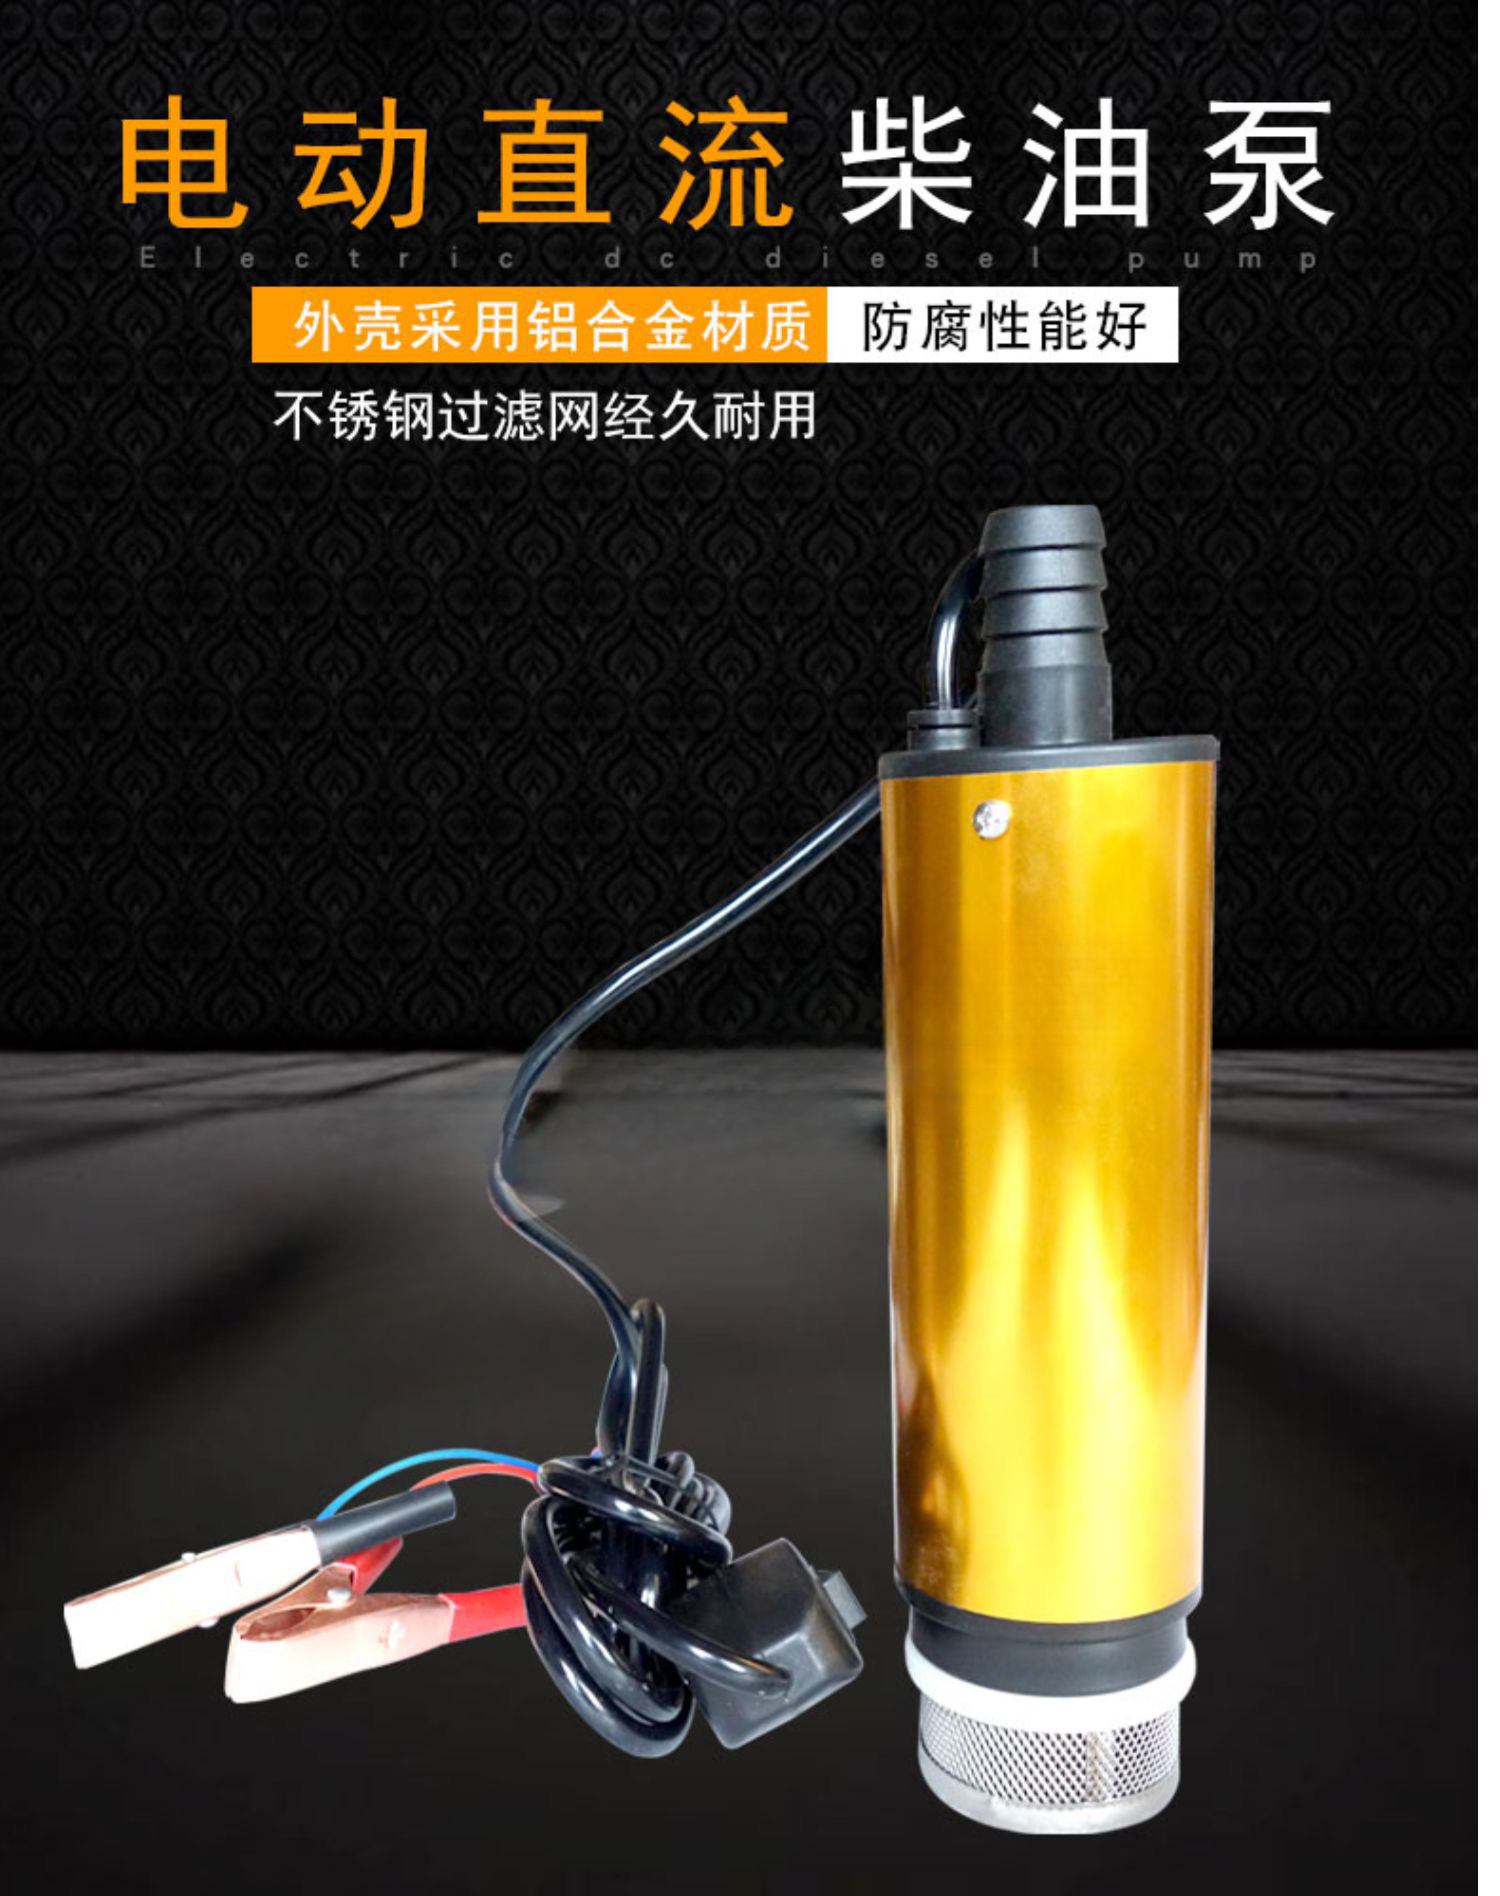 Electric oil pump, diesel 12v24V universal refueling gun, fully automatic small pumping unit, water pump, oil pump